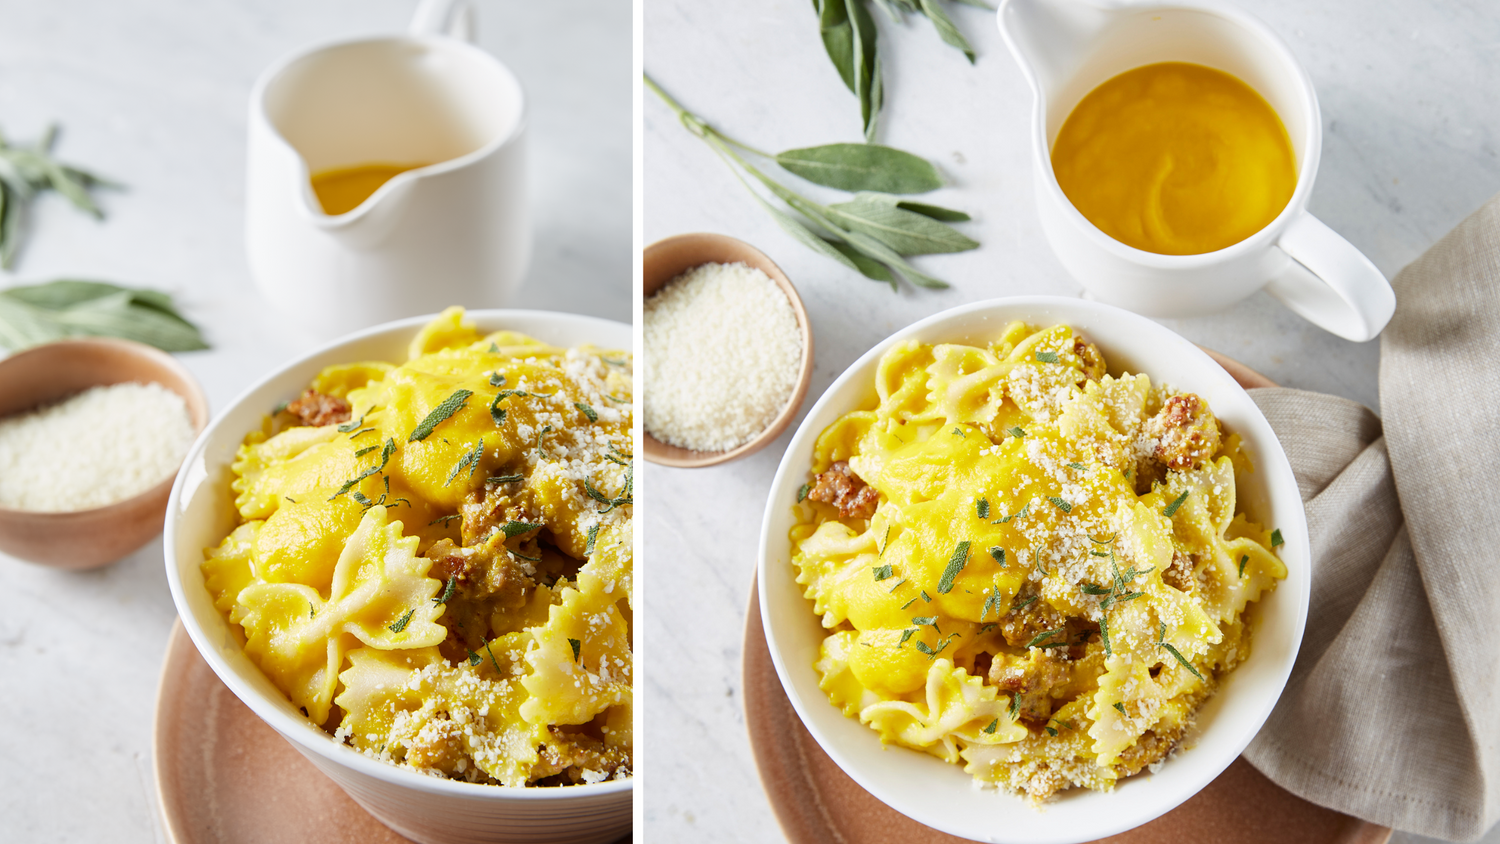 Butternut squash pasta with sausage